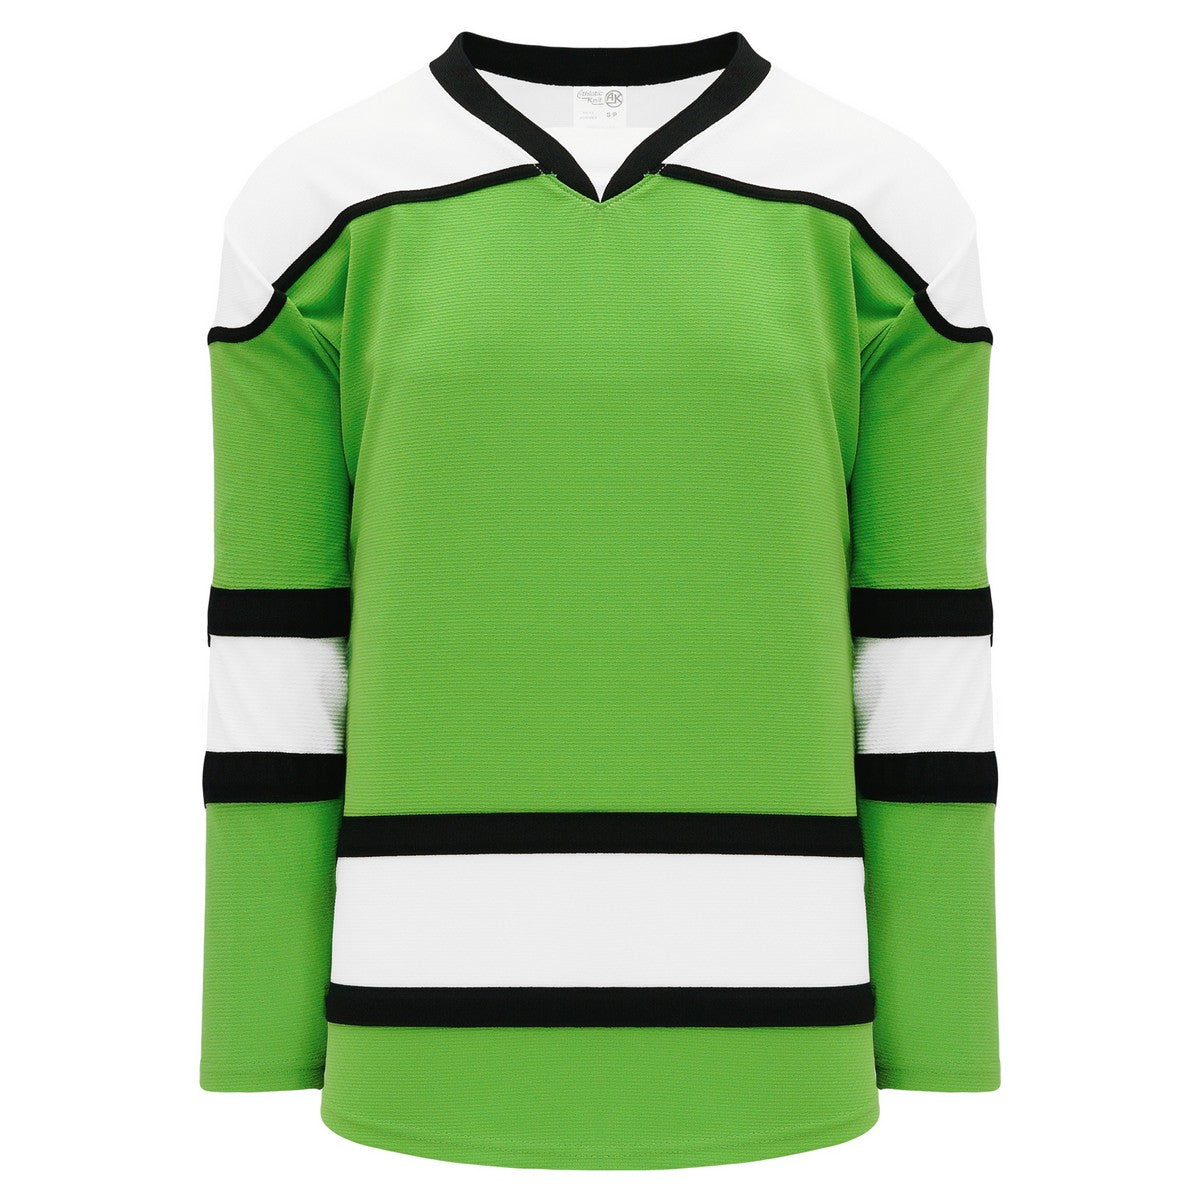 Select Series H7500 Jersey Green-White